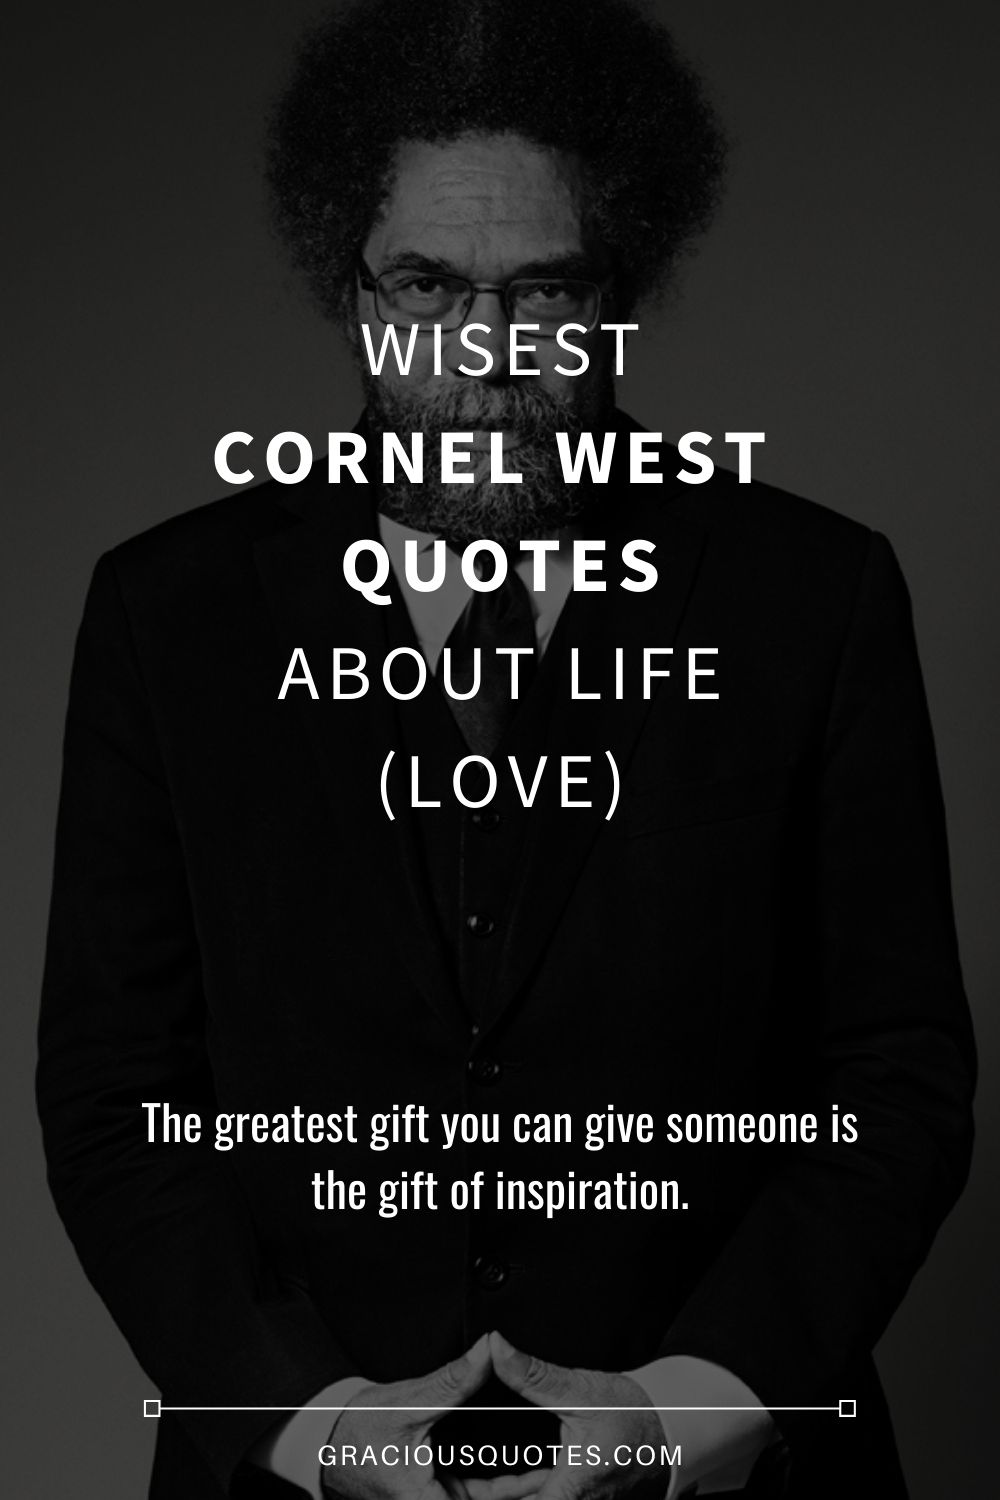 Wisest Cornel West Quotes About Life (LOVE) - Gracious Quotes